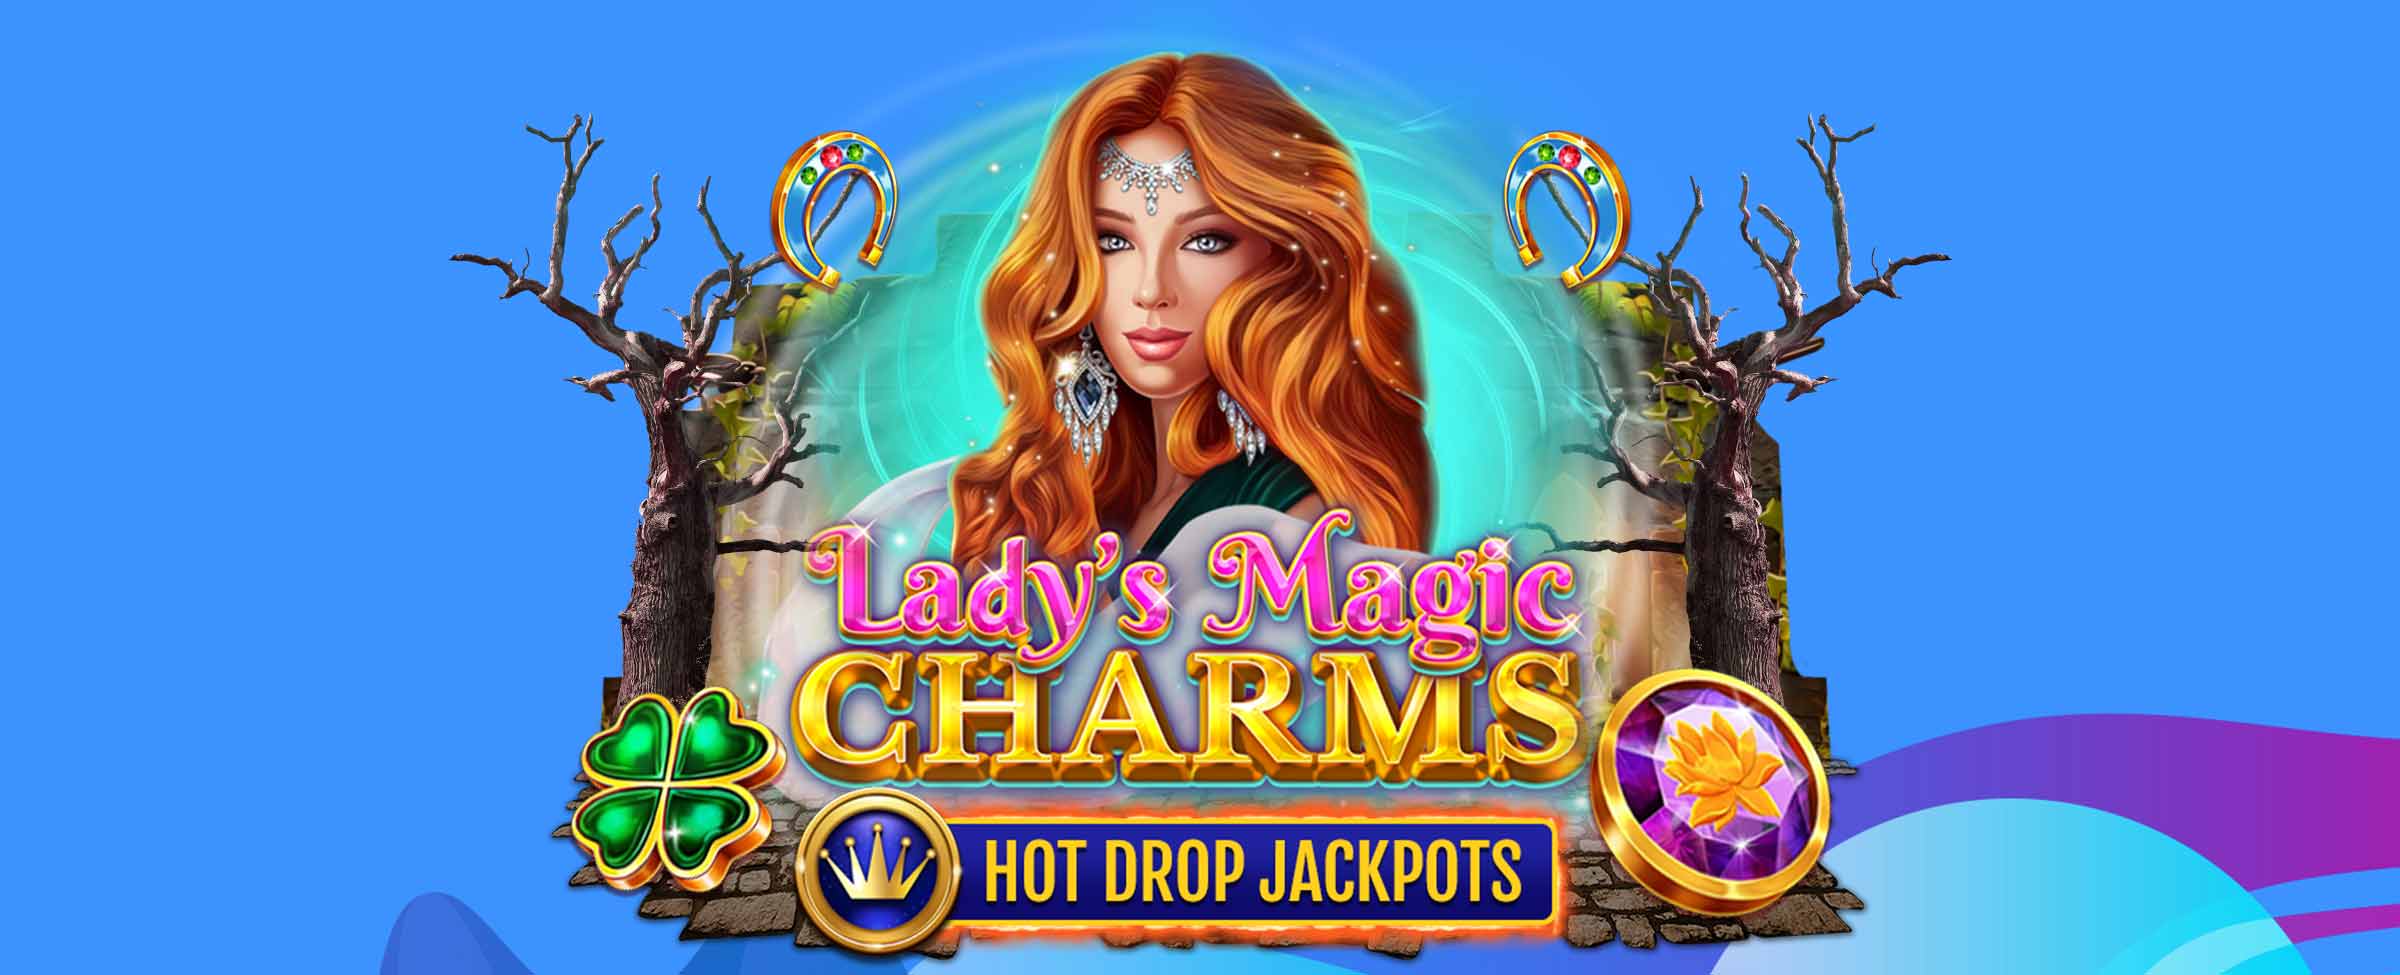 The red haired Lady Magic standing behind the Lady's Magic Charms online slot logo with slots symbols on either side